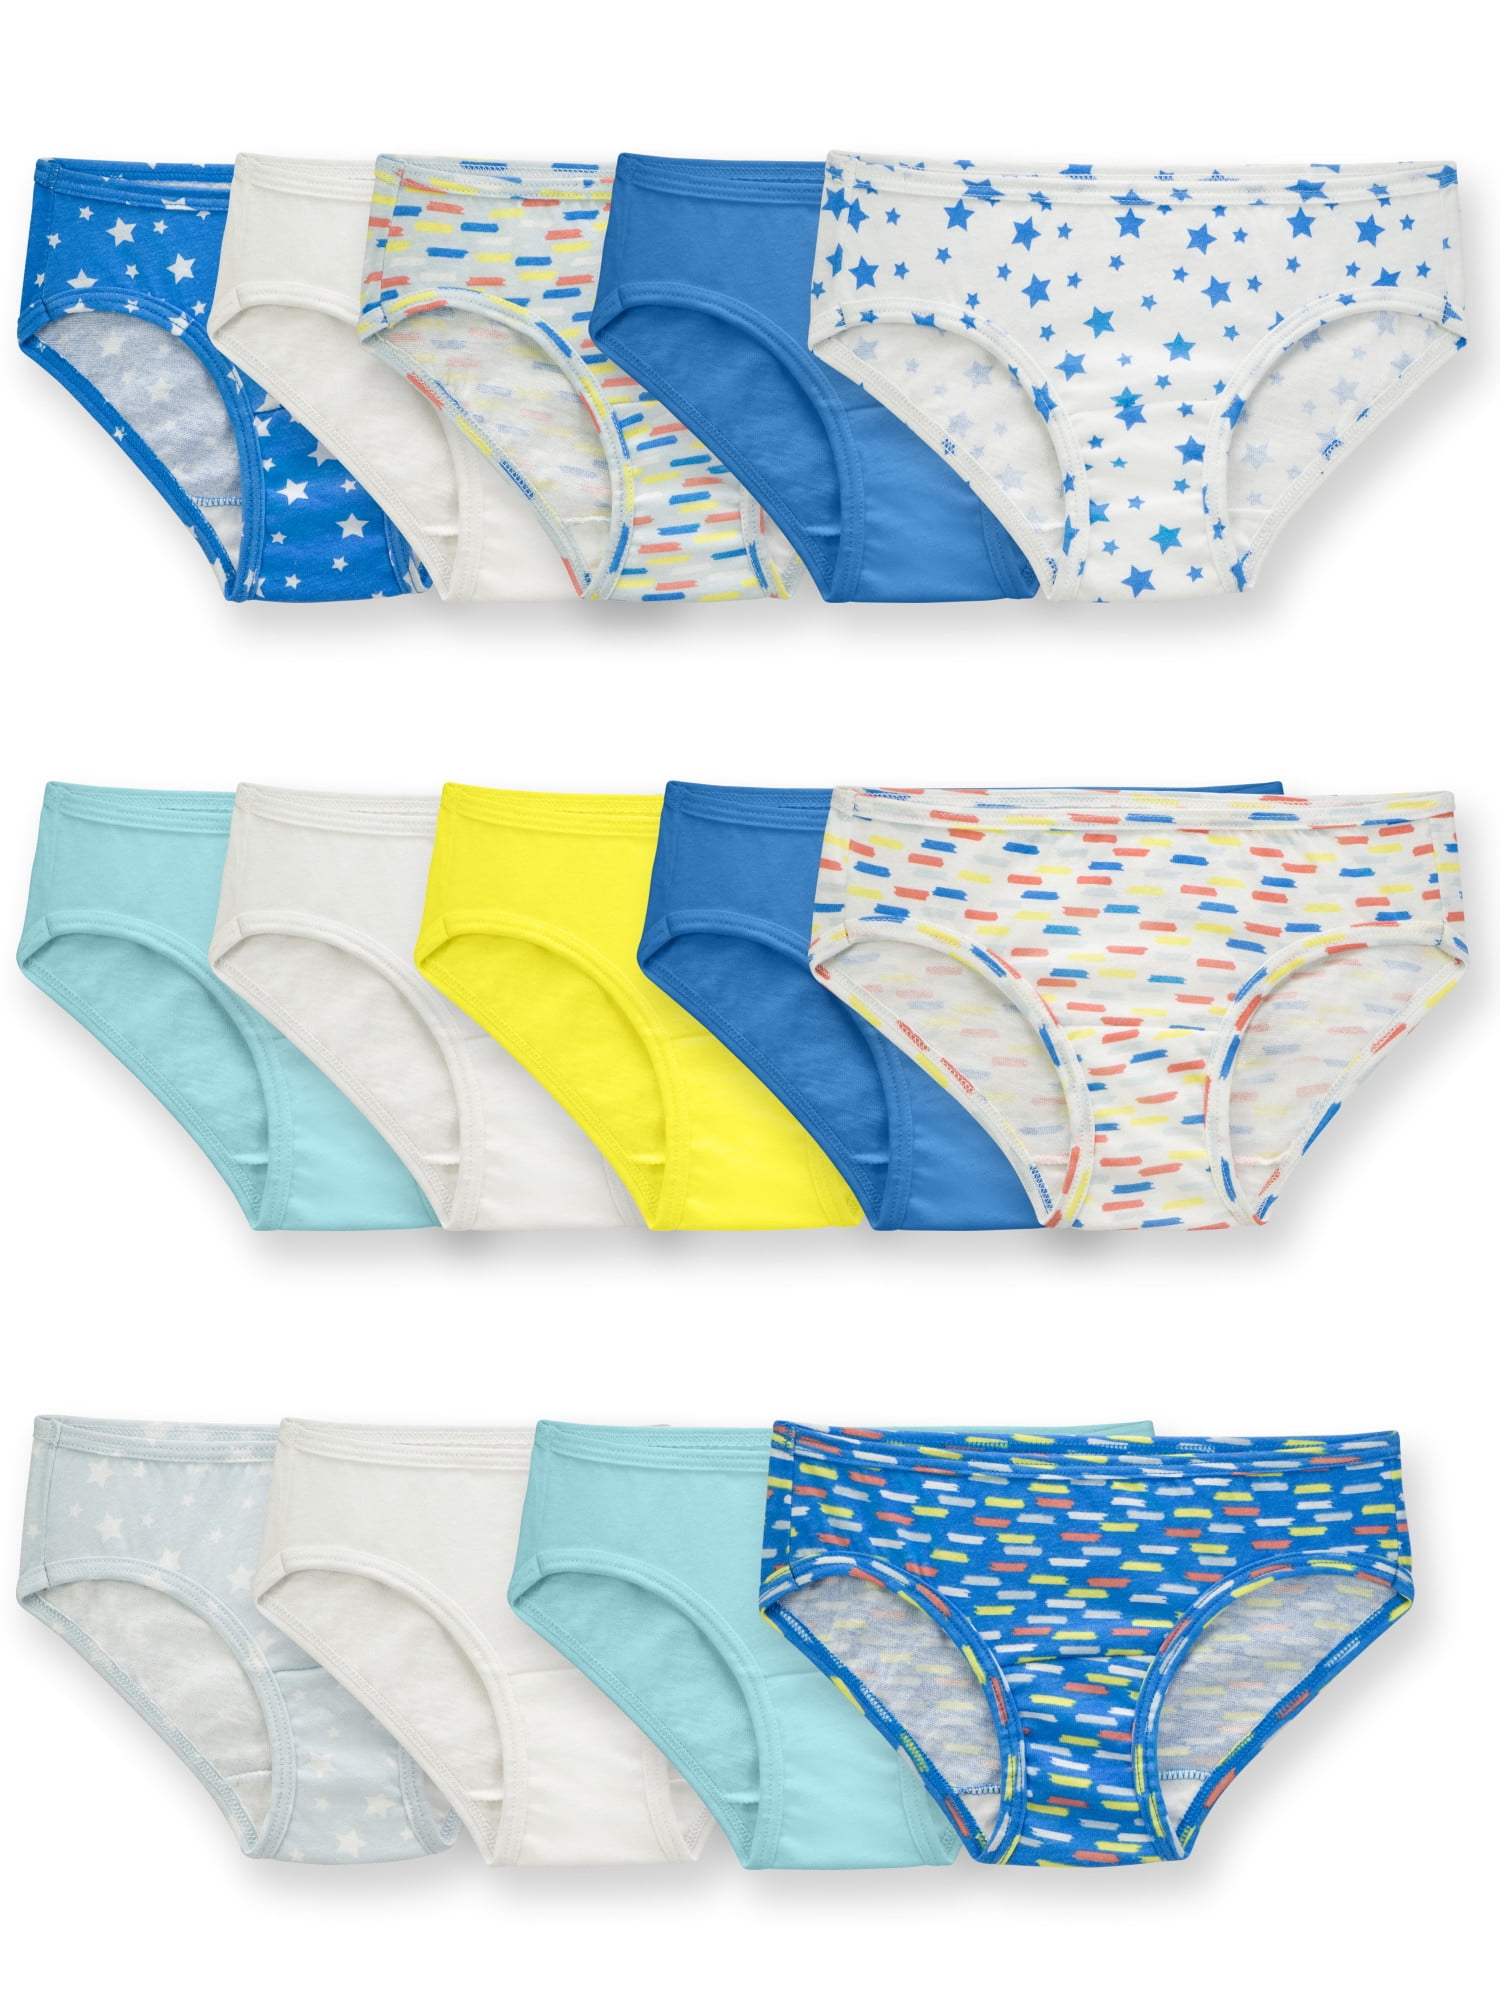 CUTE NWTS~12 PACK GIRLS FRUIT OF THE  LOOM COTTON HIPSTERS/ BIKINI UNDERWEAR 